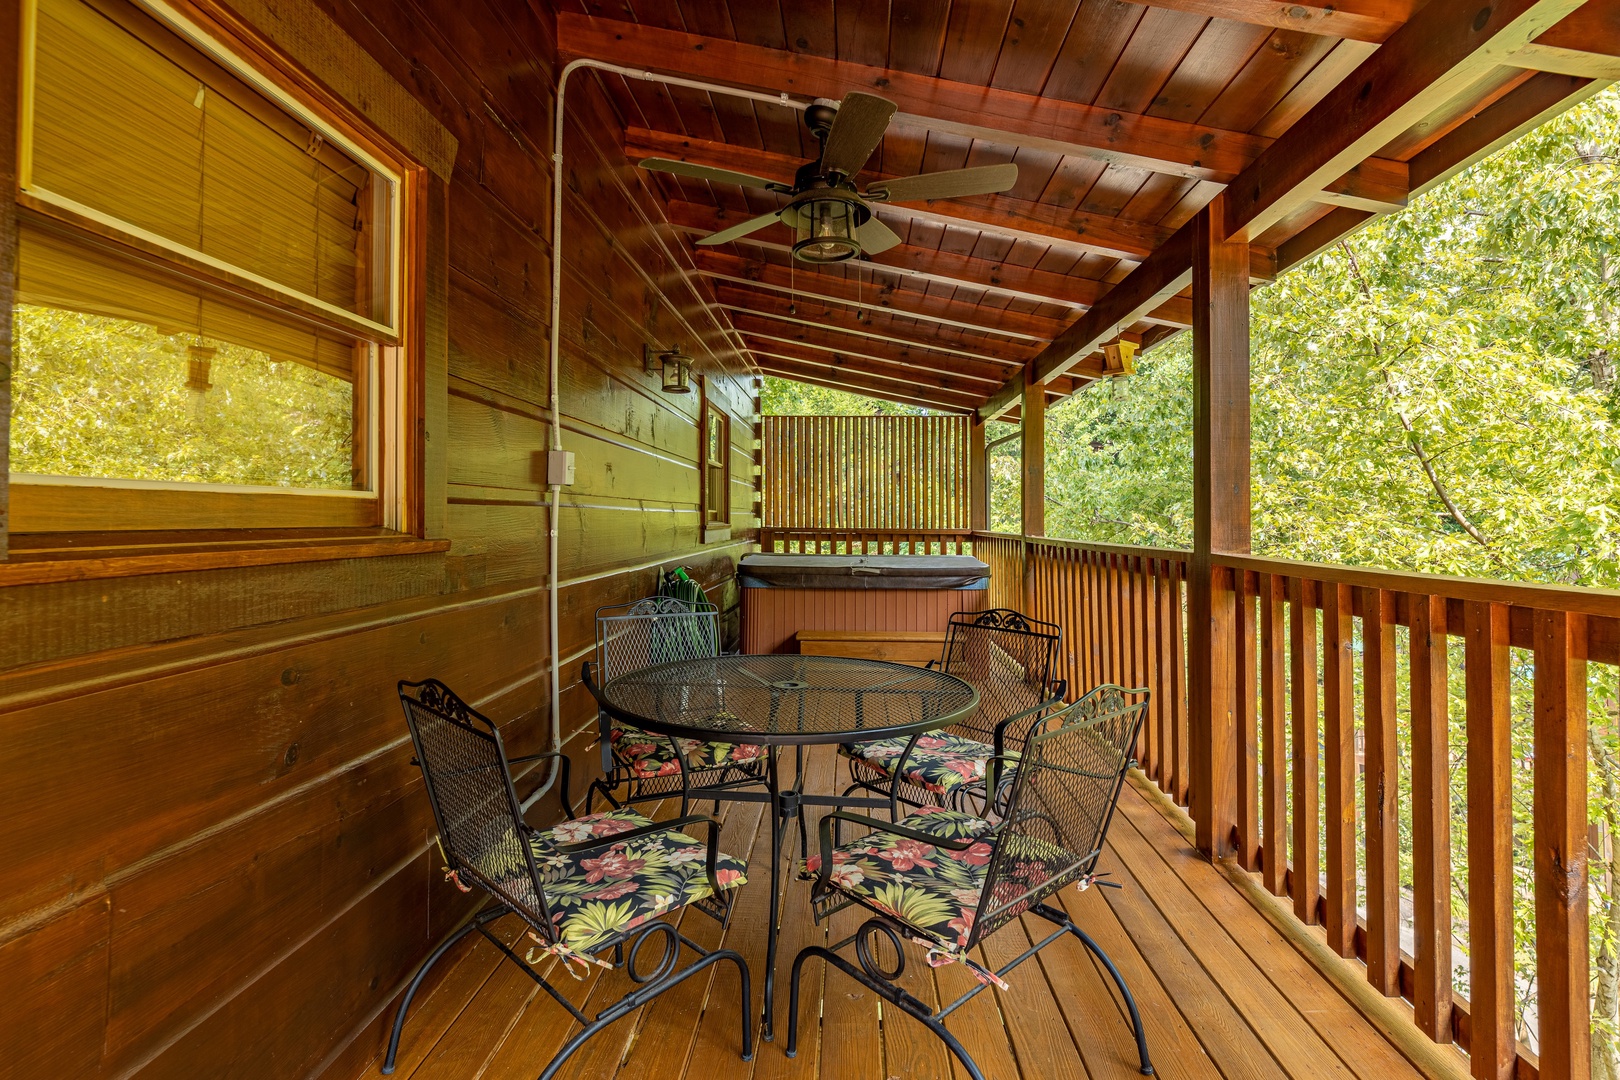 Outdoor dining for 4 at Livin' Simple, a 2 bedroom cabin rental located in Pigeon Forge